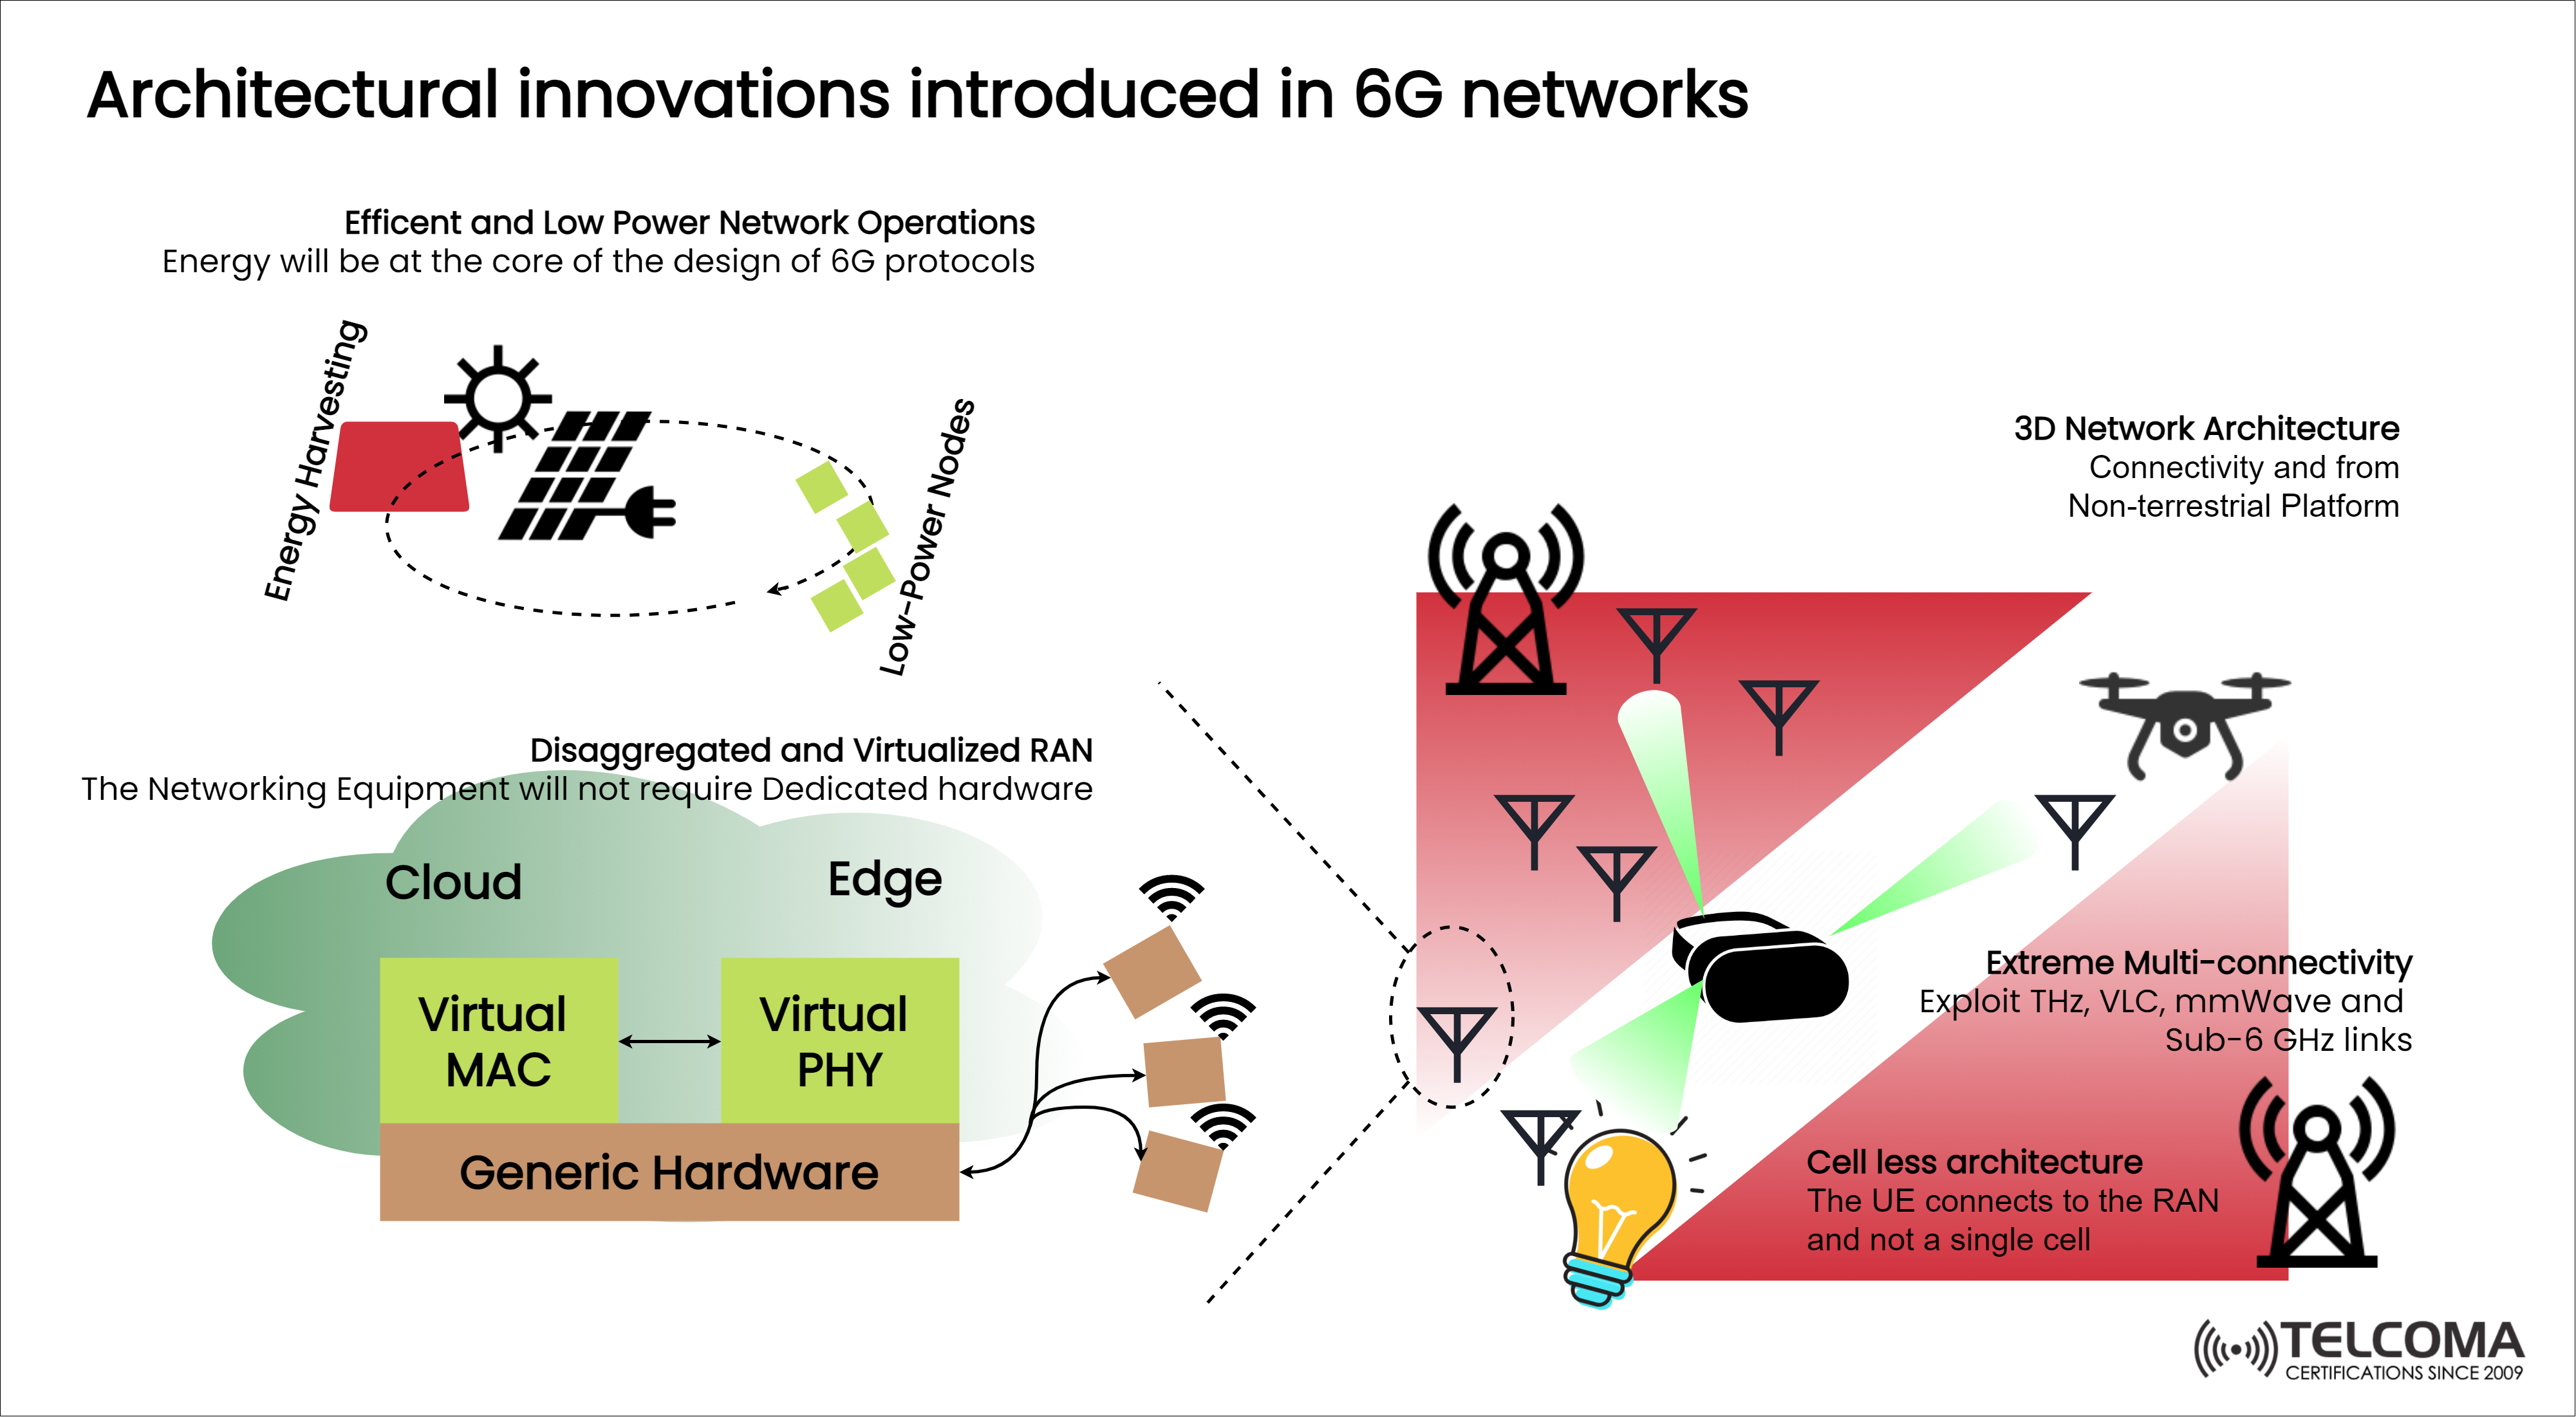 Architectural innovations introduced in 6G networks